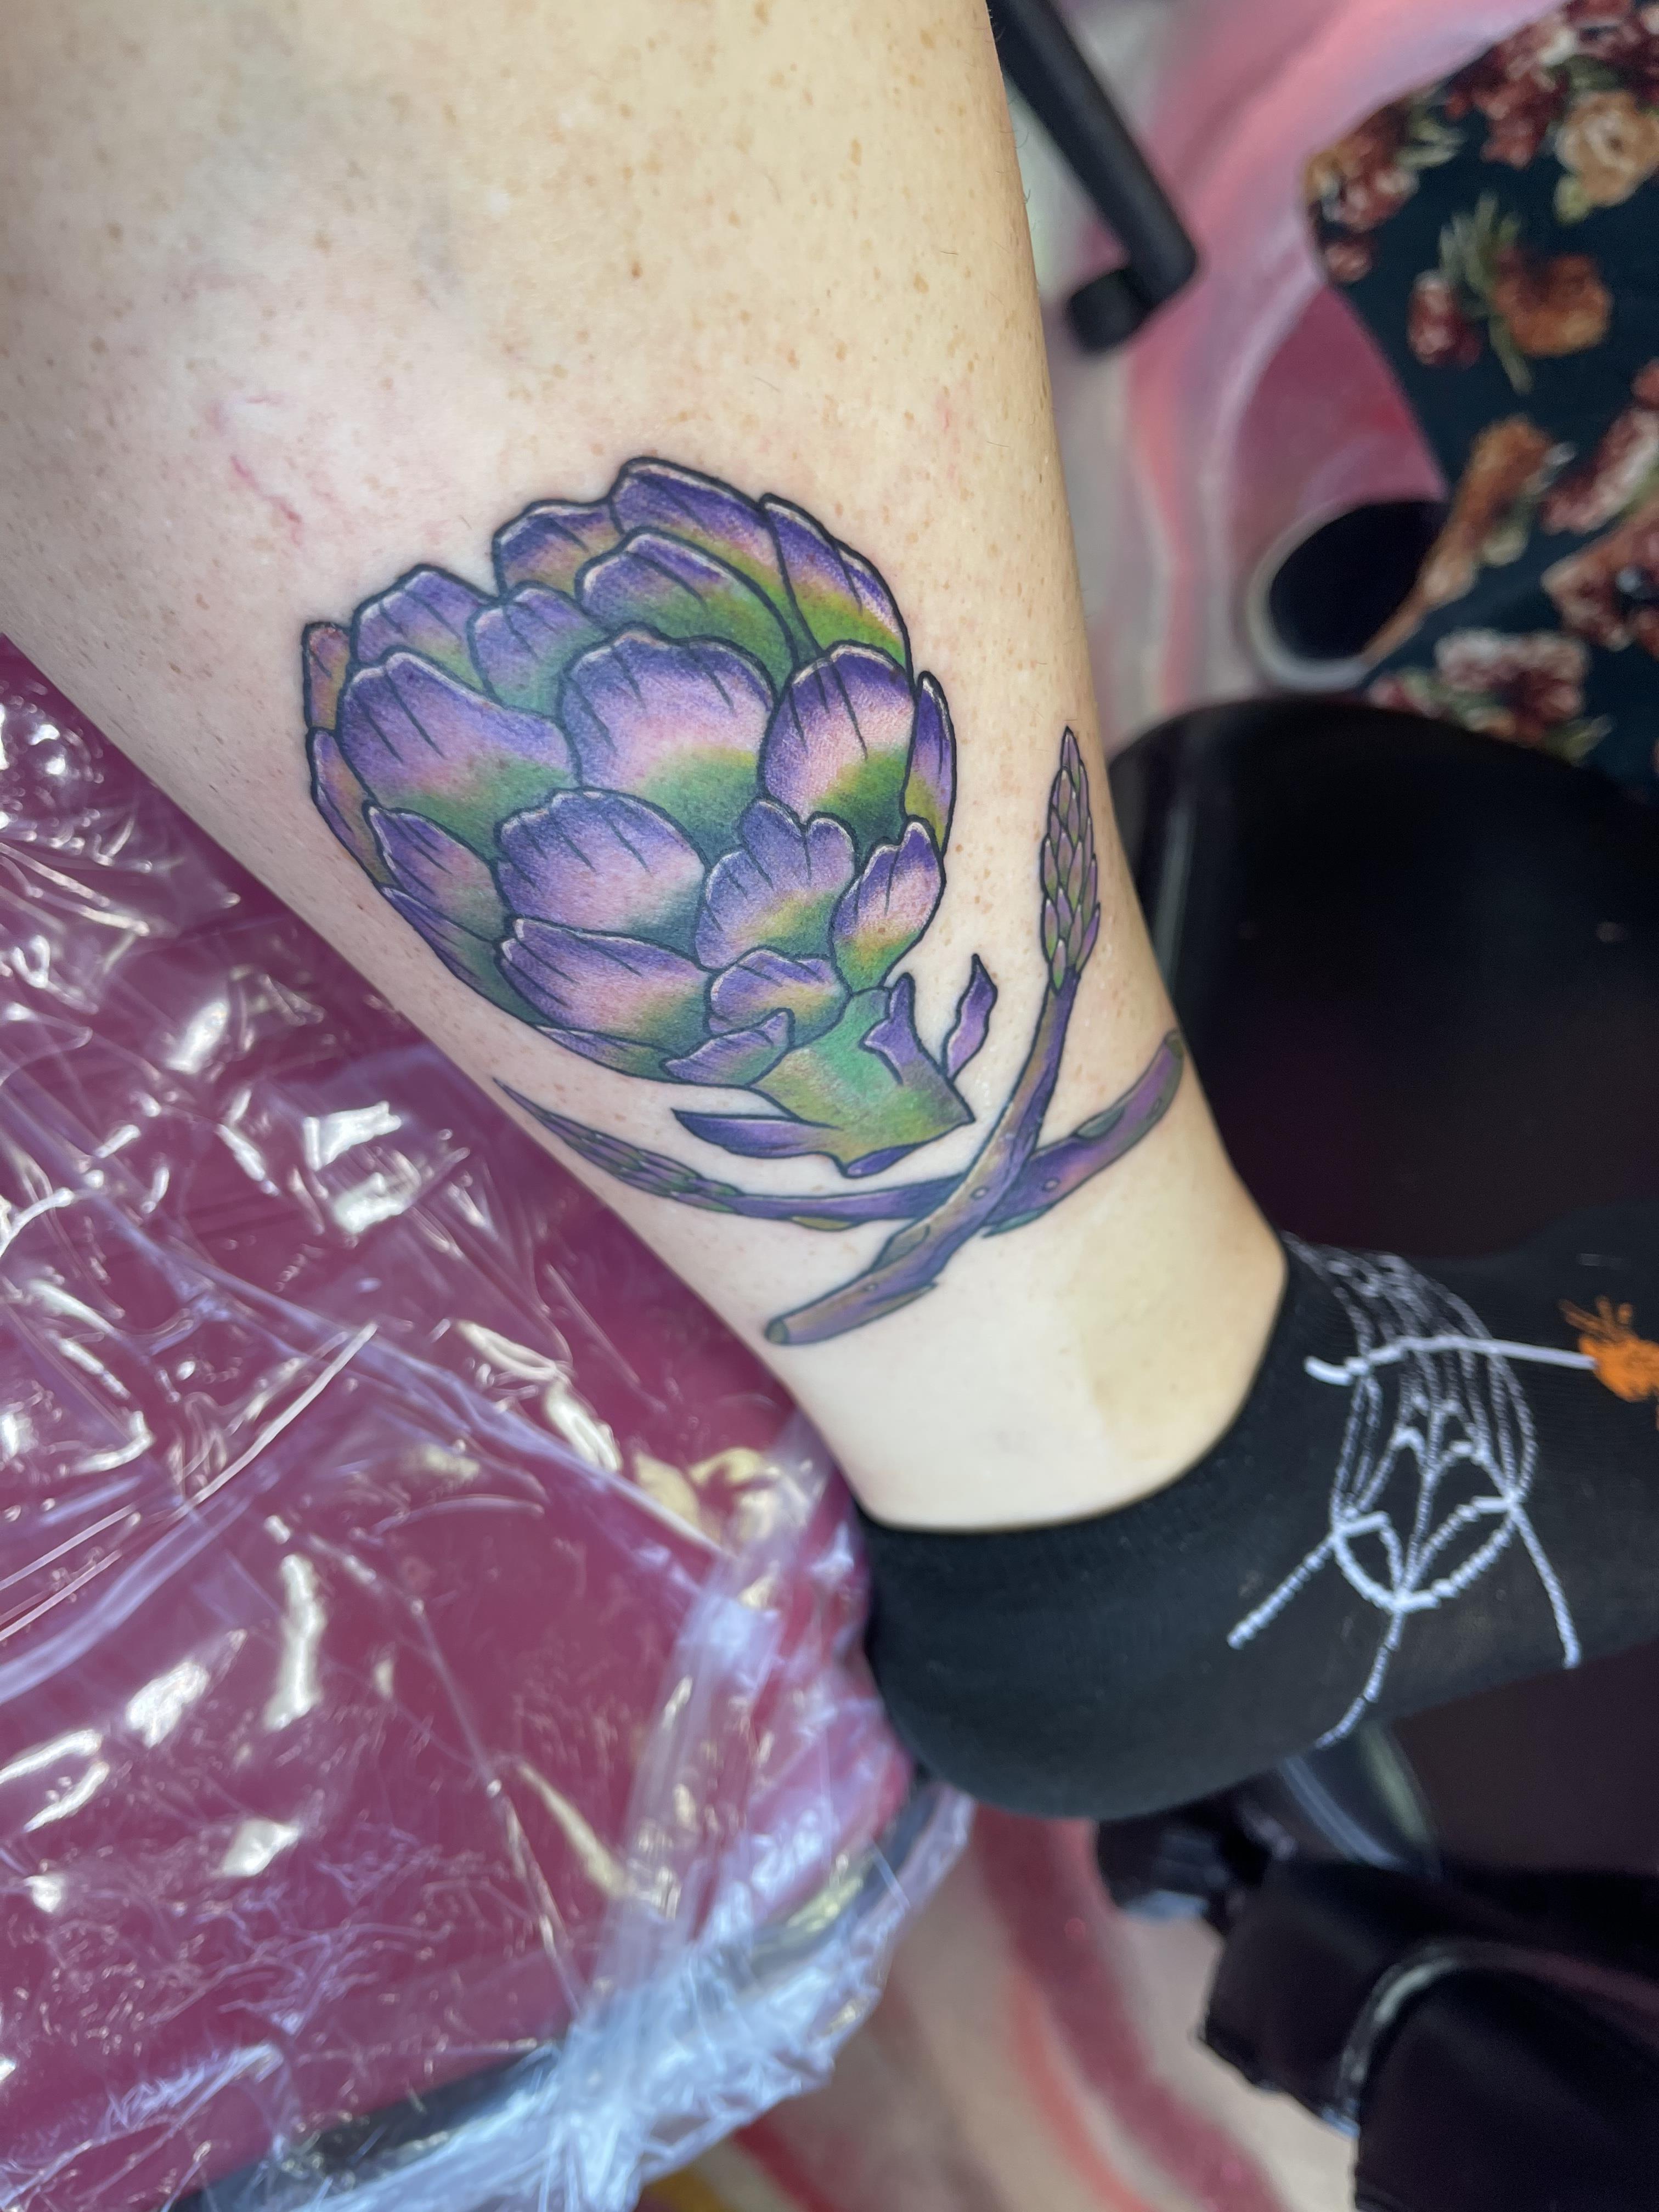 Black Dog Tattoo Collective - Artichoke tattoo. Done by Lauren in her own  style. - - - For appointments contact: @laurenfeskou or  @black_dog_tattoo_collective - - - #blackclawtattoo #blackworker  #blackworktattoo #blackworkertattoos #blackworkartist ...